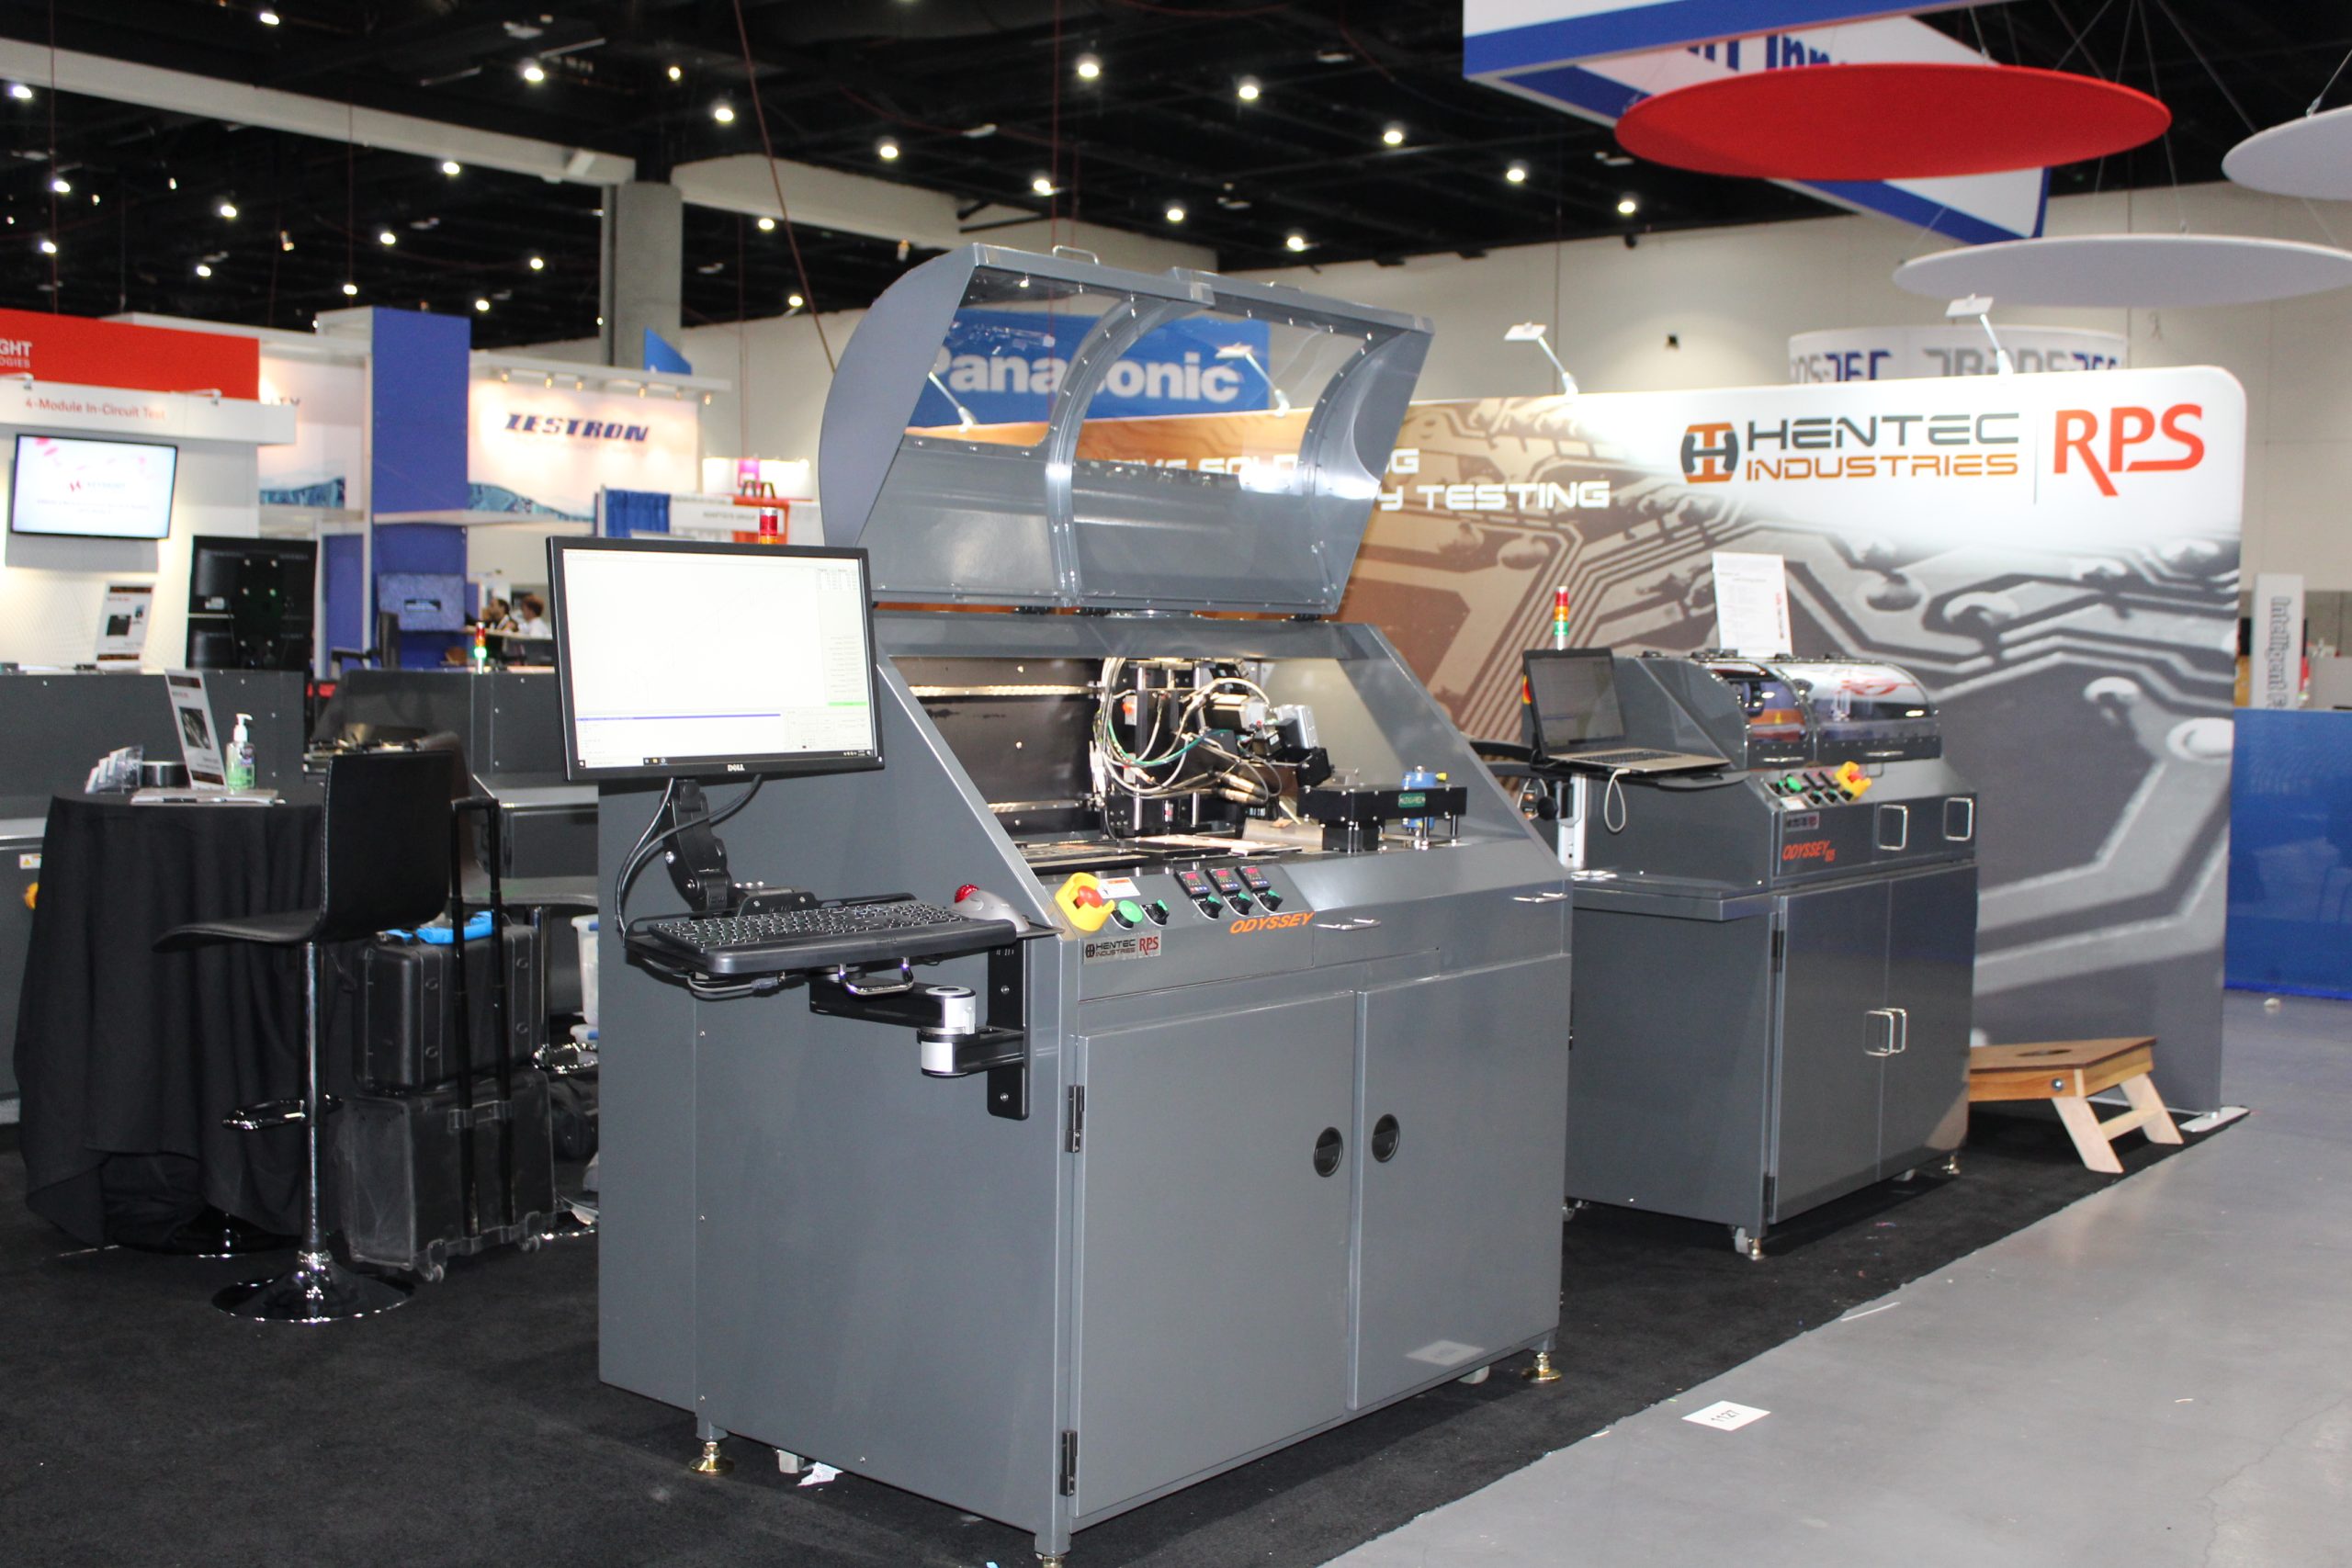 Hentec/RPS to Showcase Vector Selective Soldering and Odyssey Lead Tinning Systems at IPC EXPO 2023